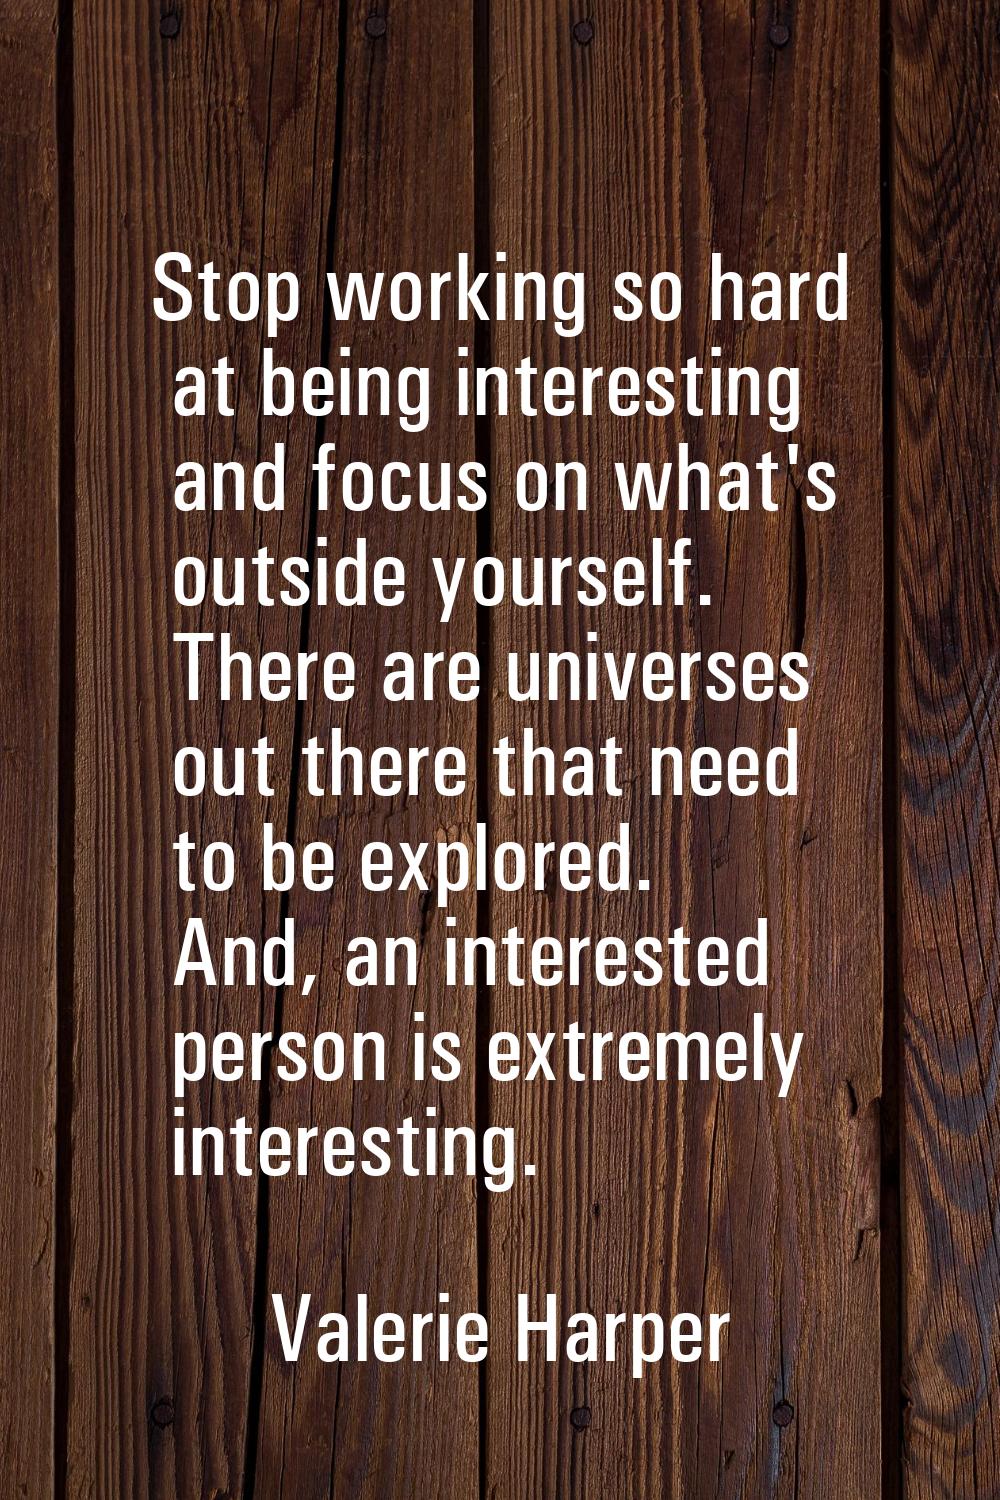 Stop working so hard at being interesting and focus on what's outside yourself. There are universes